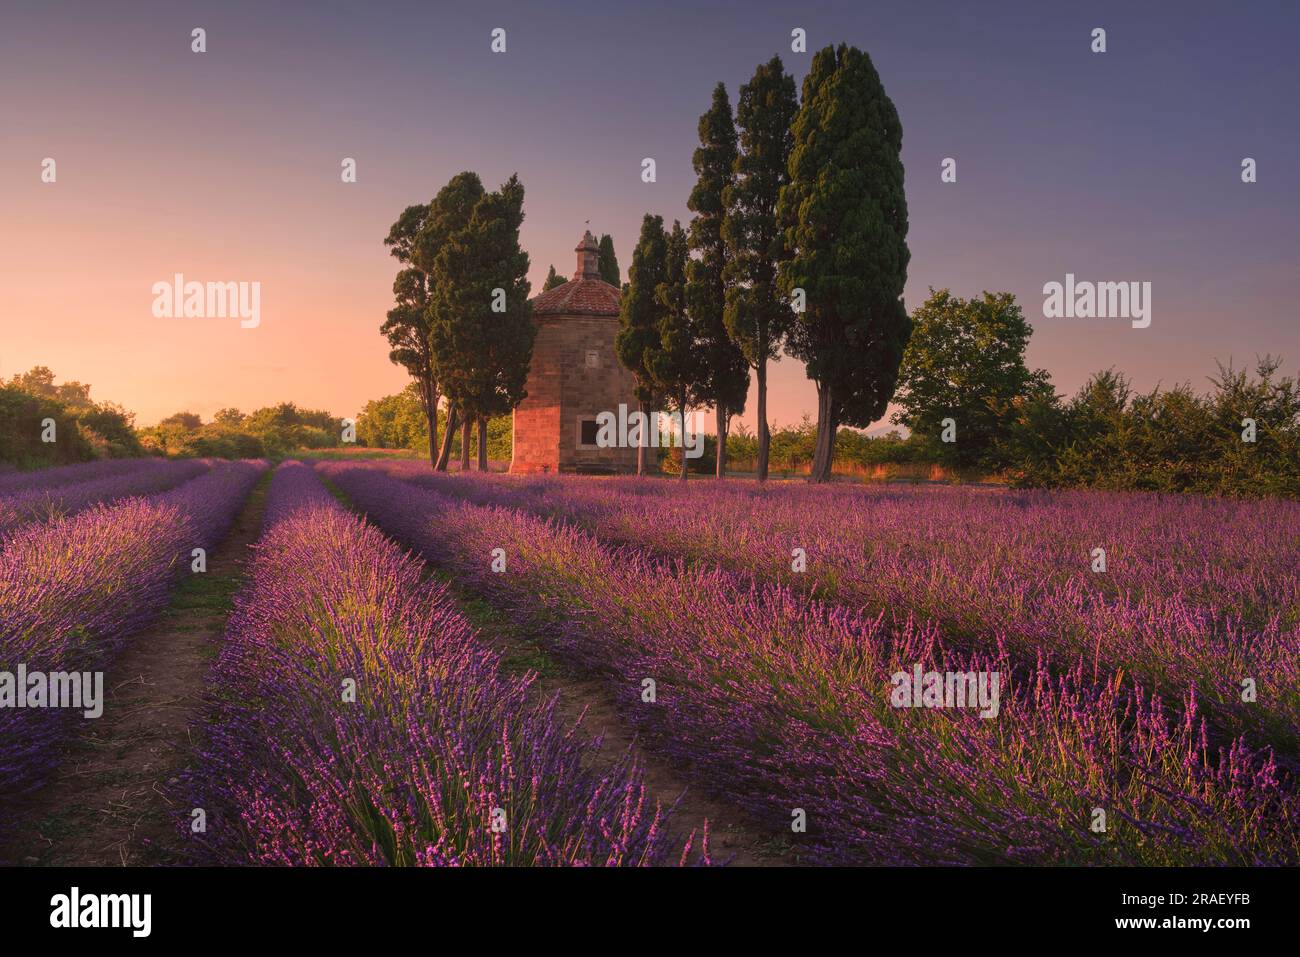 Blooming lavender field, cypress trees and Oratorio di San Guido church. Bolgheri, province of Livorno, Tuscany region, Italy Stock Photo